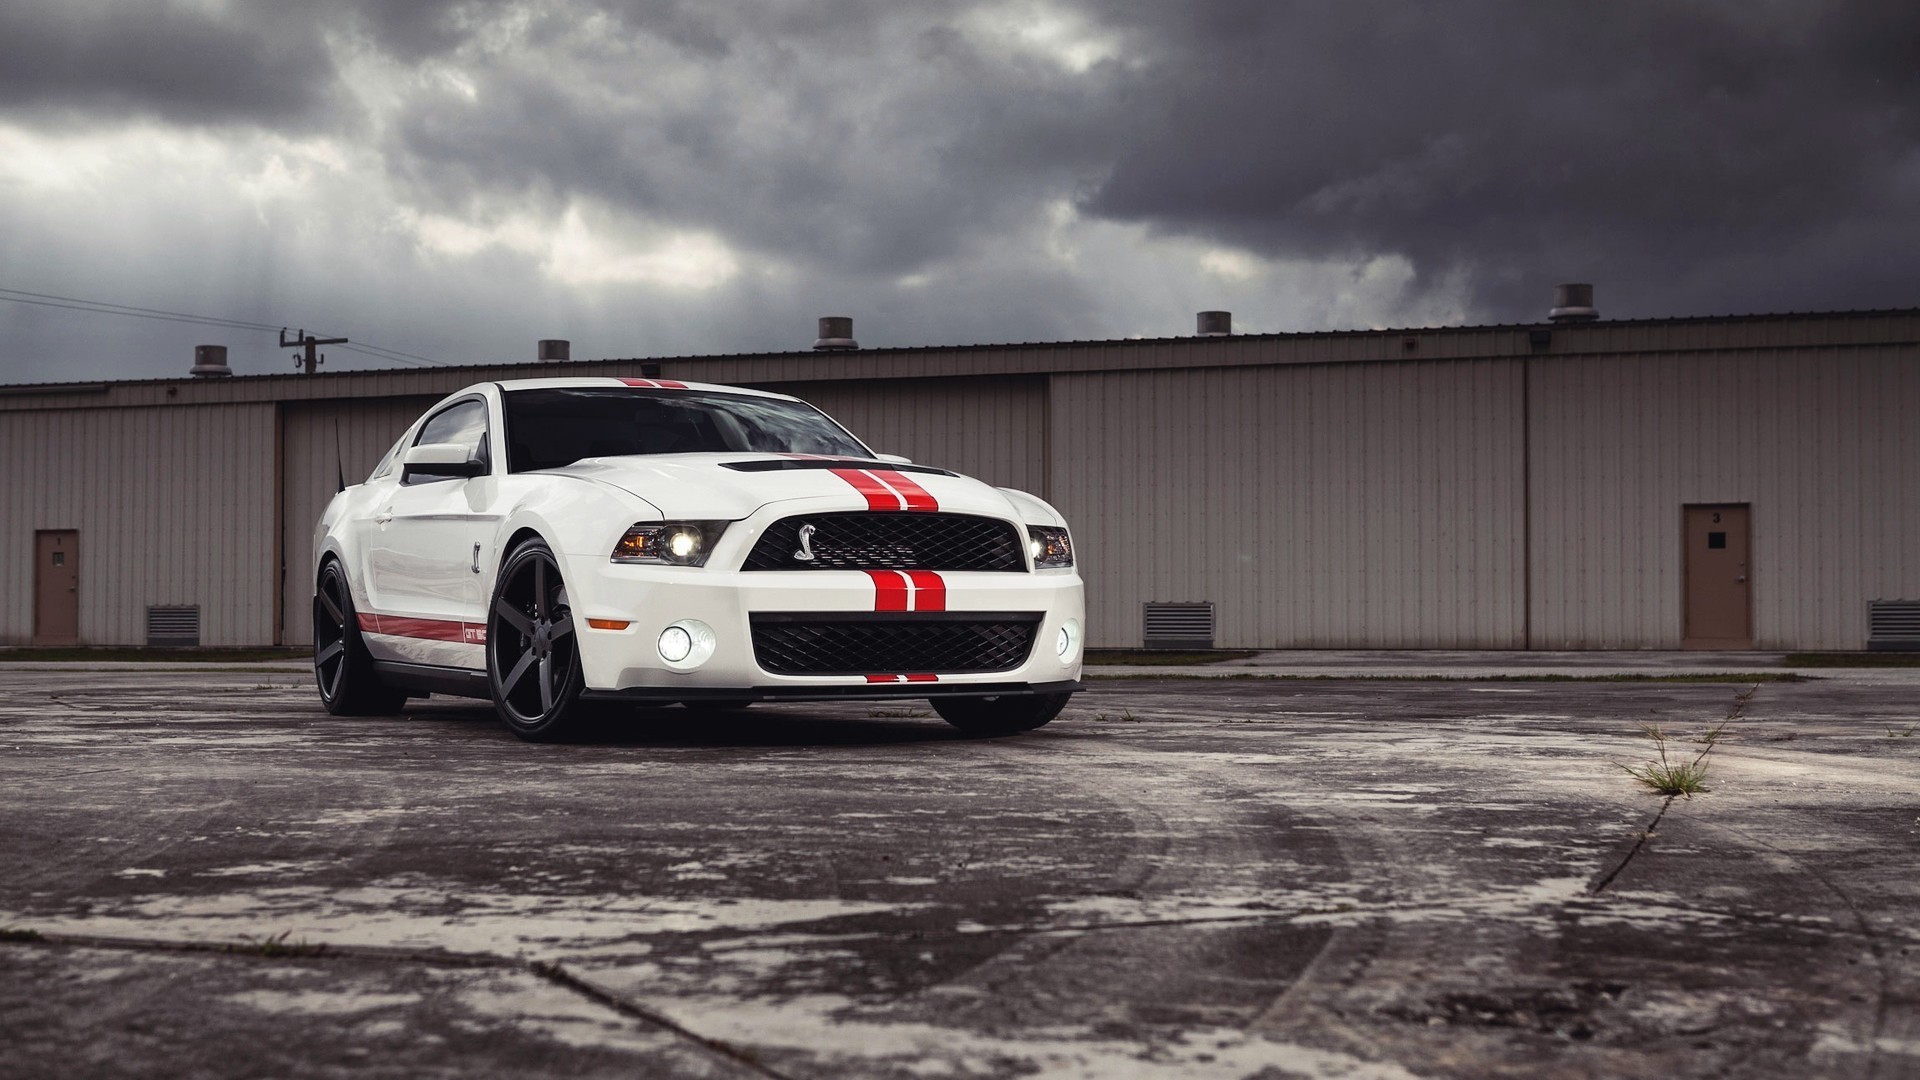 1920x1080 Download Shelby Wallpaper Free Download Full Size